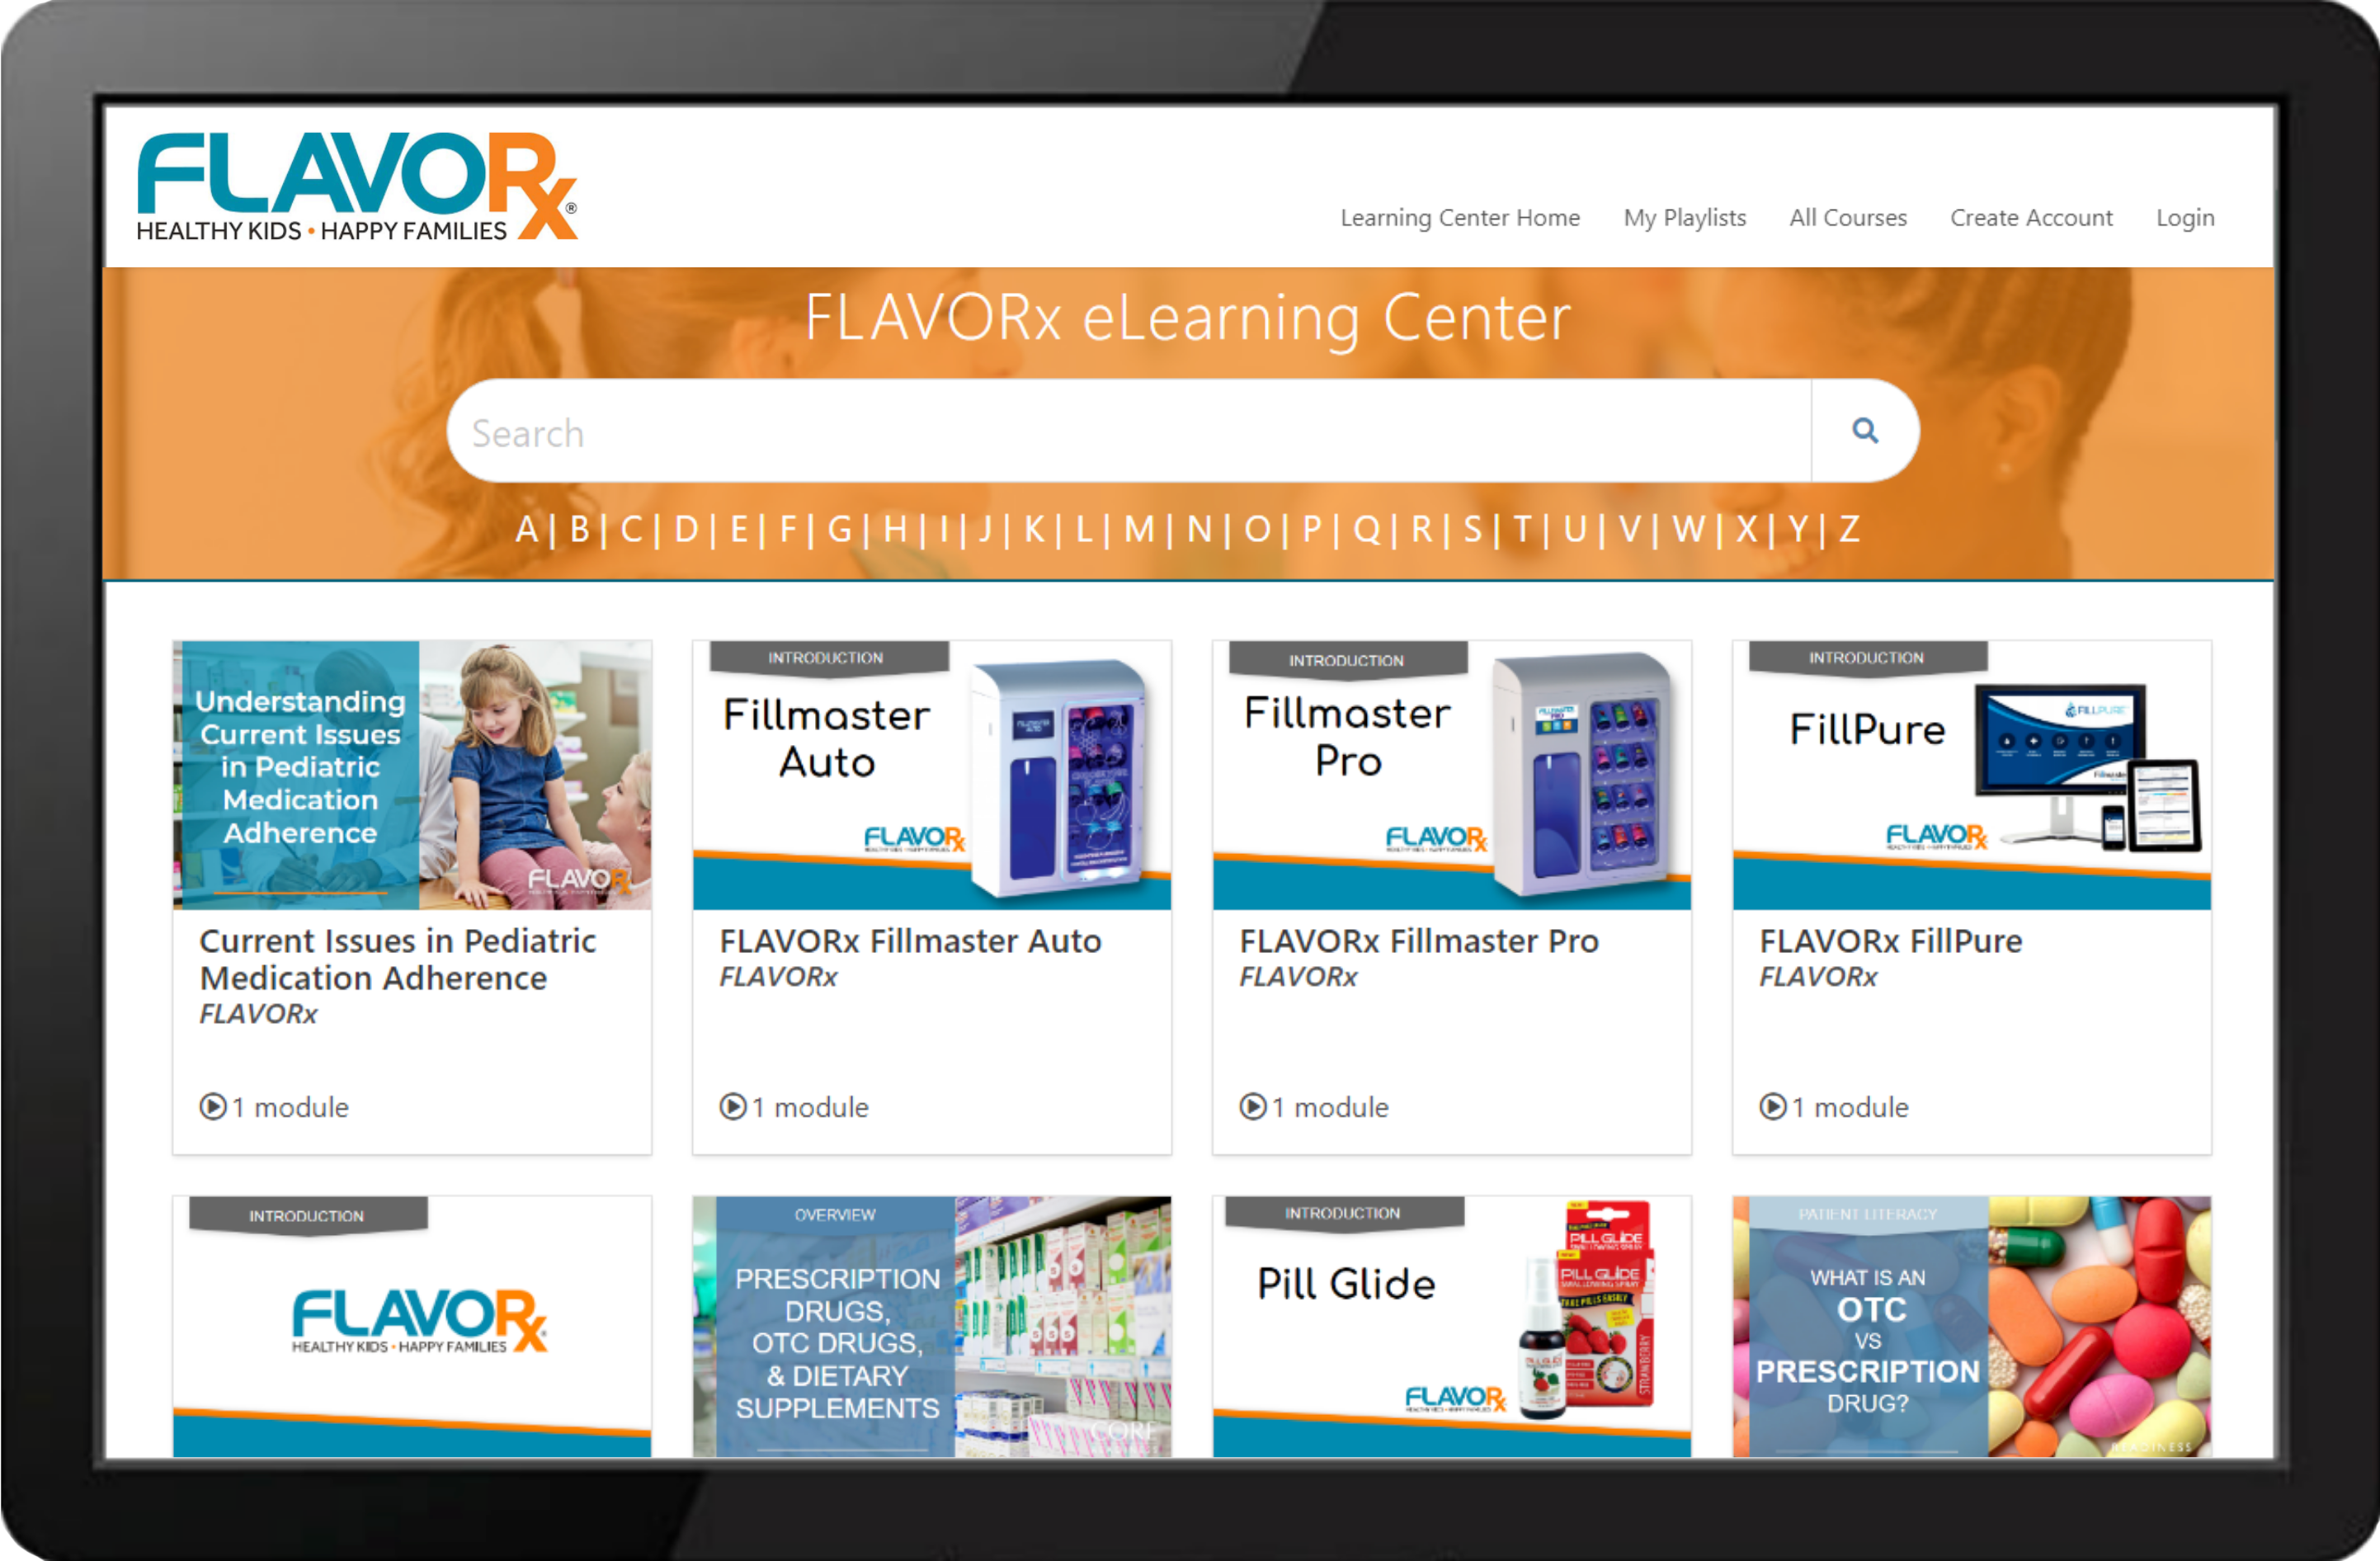 FLAVORx Learning Center Example